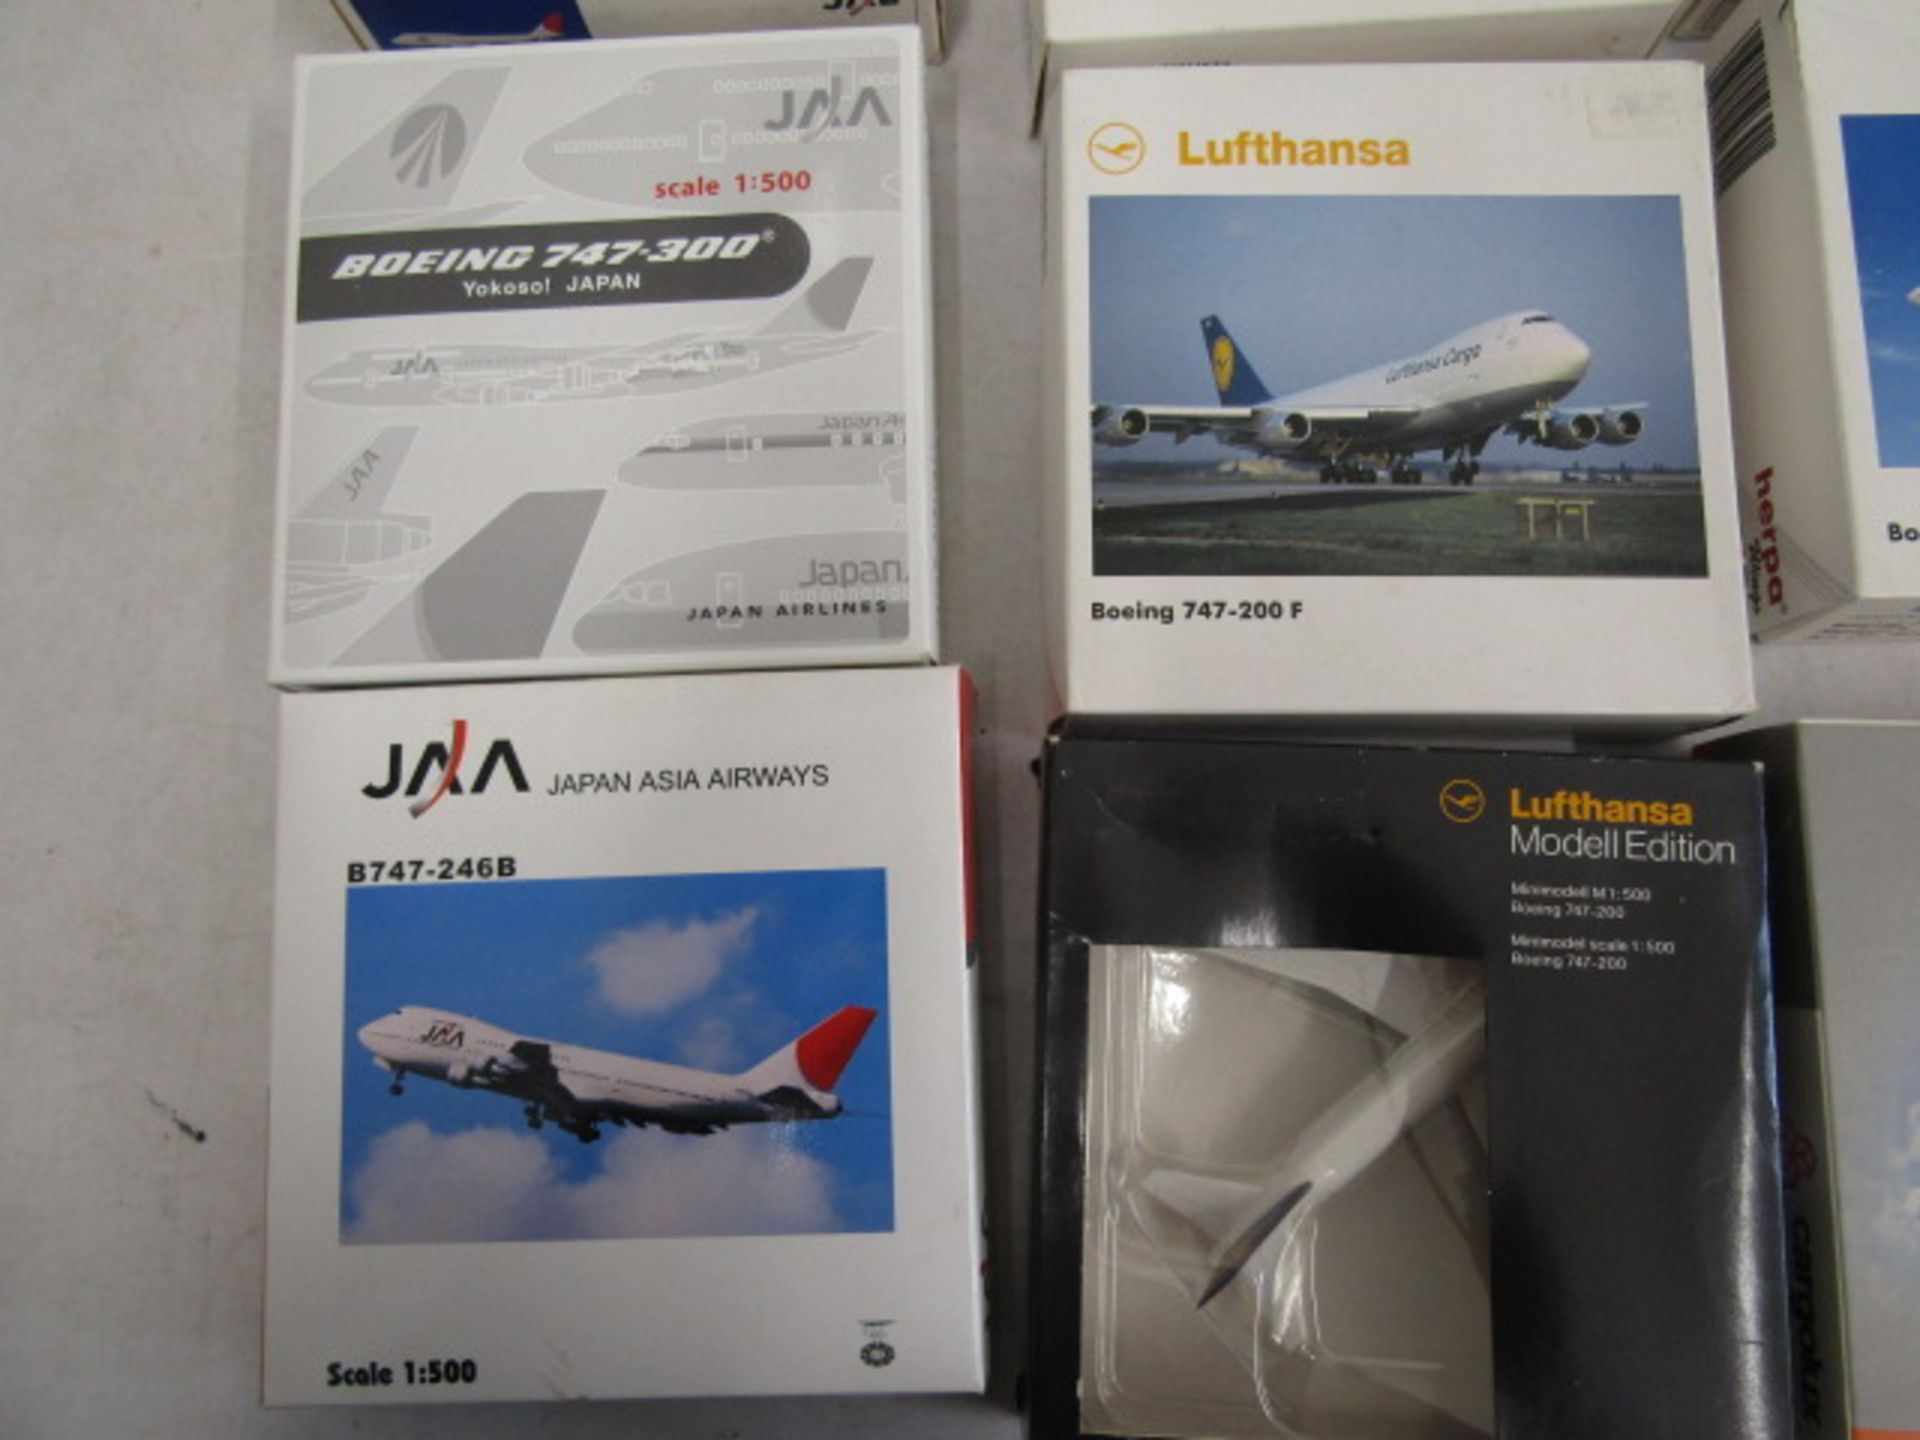 17 die cast aircraft models - Image 2 of 6